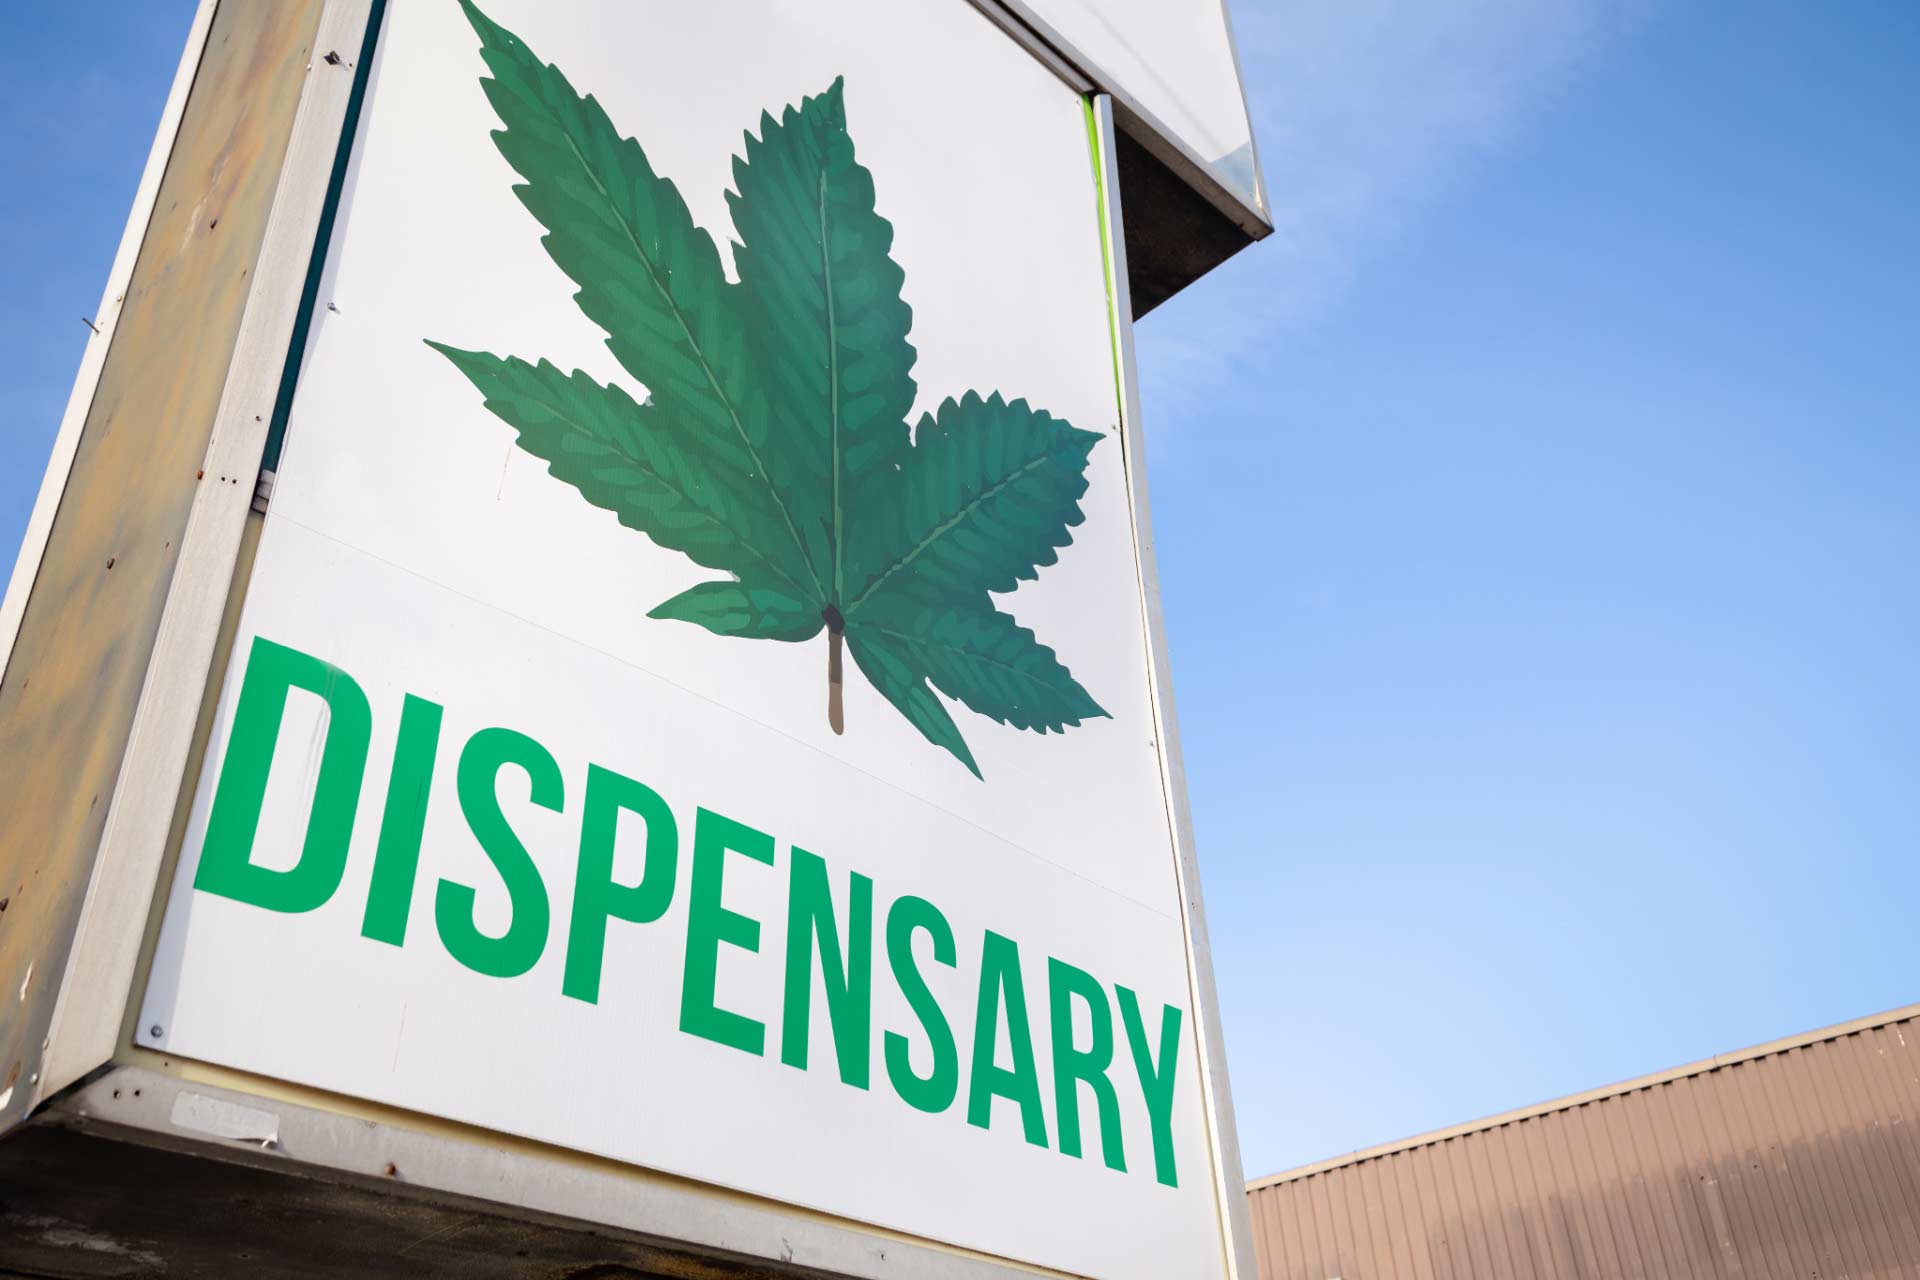 Dispensary sign. Save money by knowing where to find dispensary deals and specials.